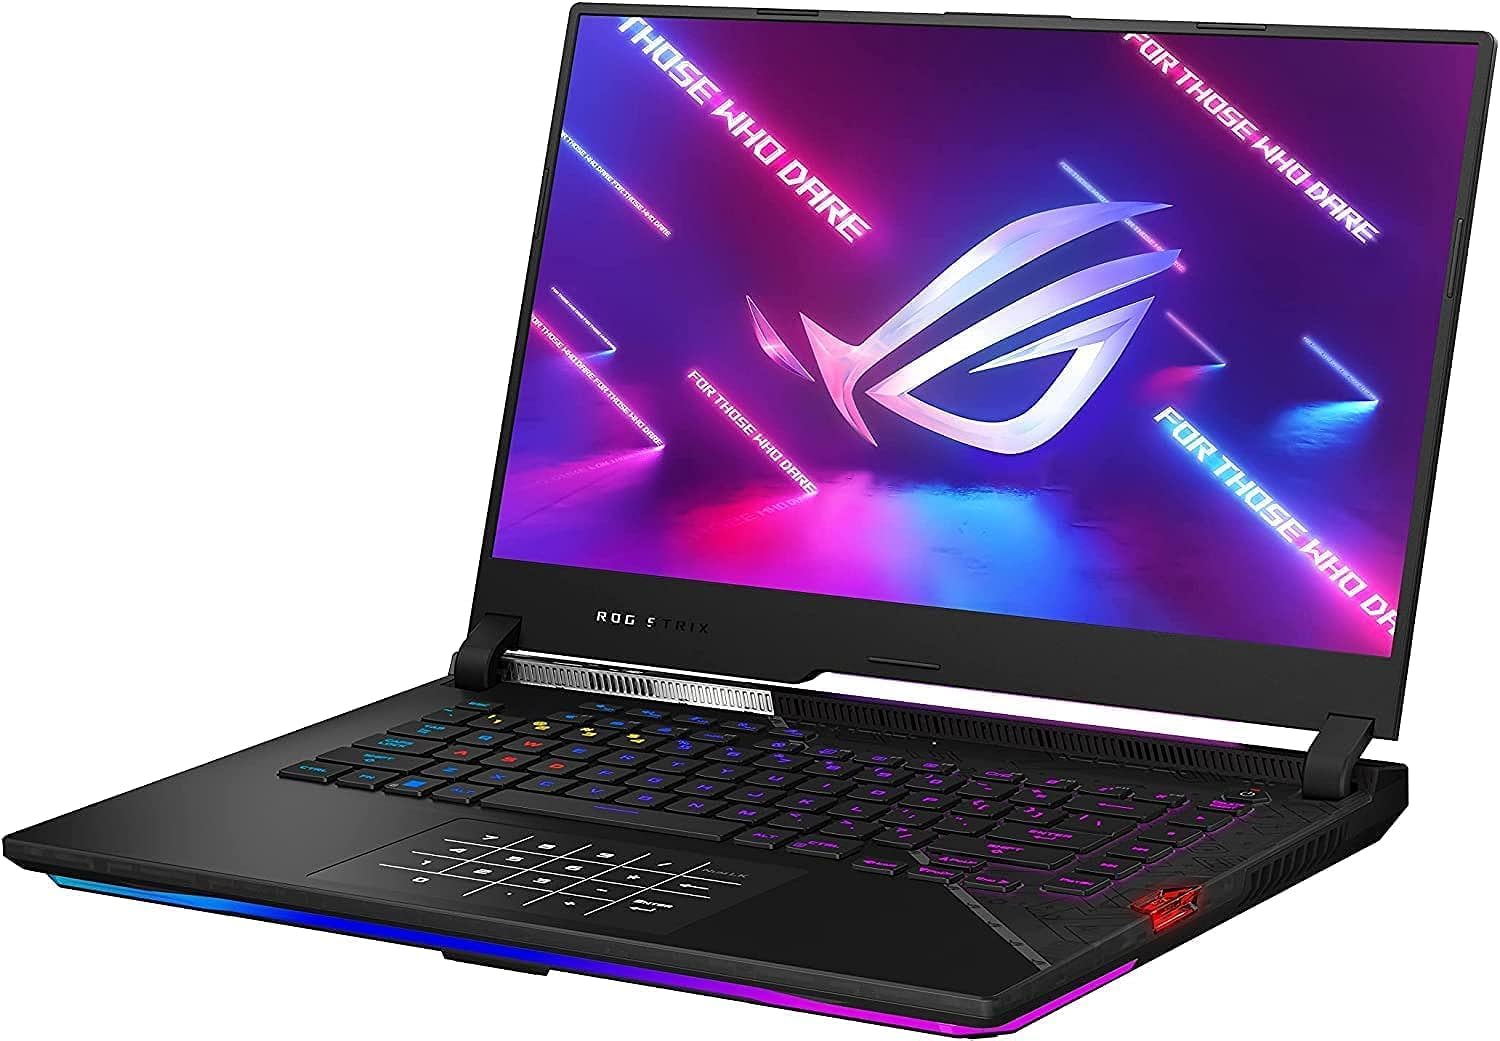 ASUS ROG Strix Scar 17 Gaming Laptop - Core i9, 16GB RAM, 1TB SSD, RTX 3070 - 17.3 Inches 0195553258203